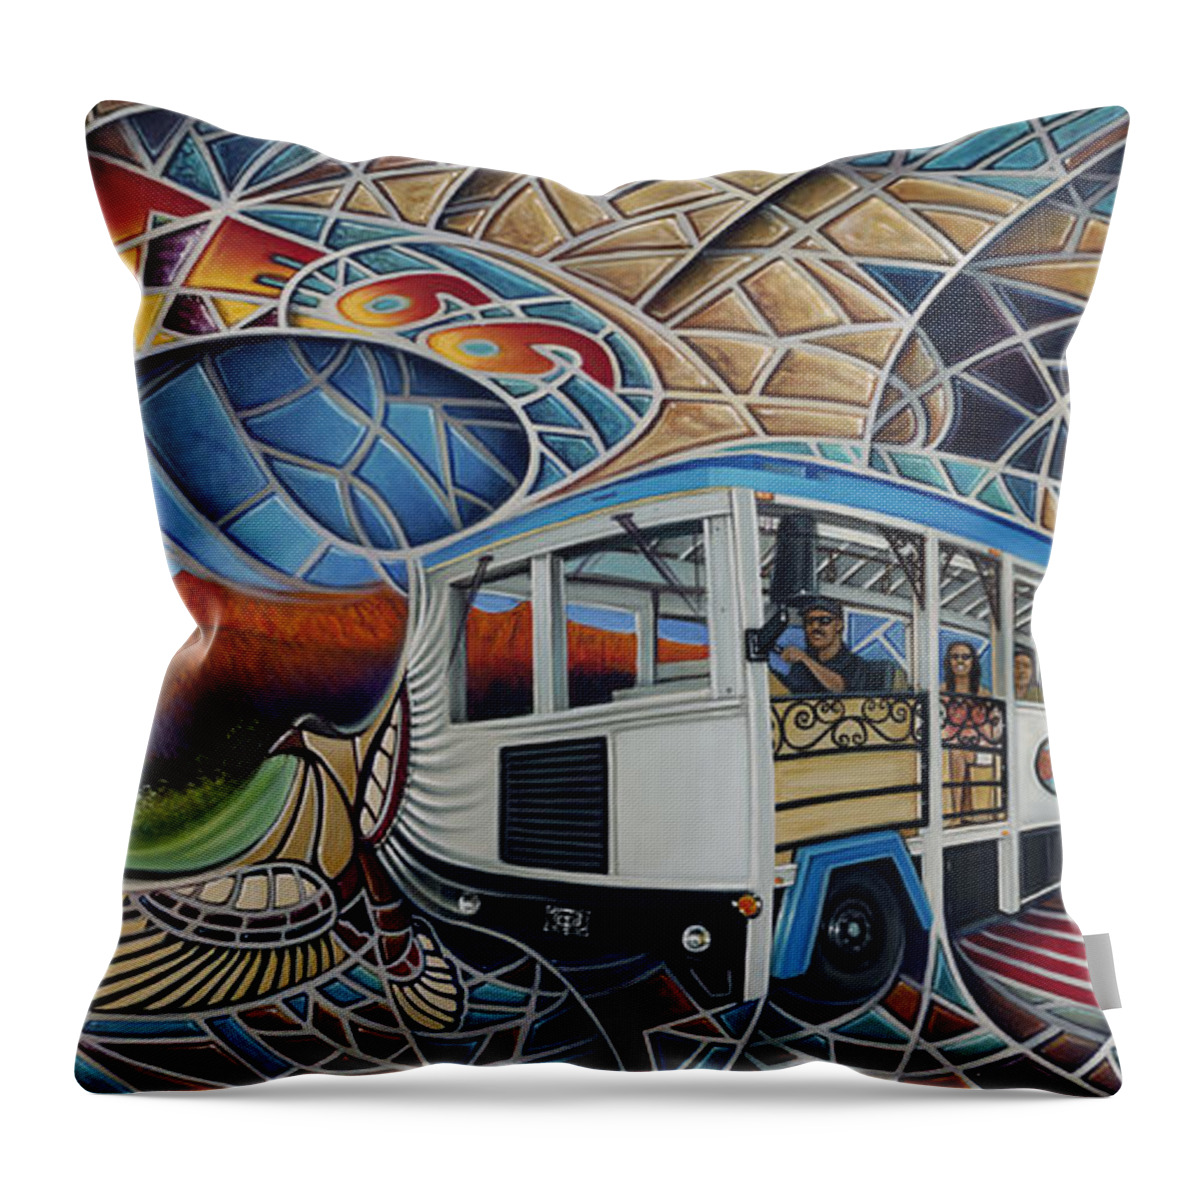 Mosiac Throw Pillow featuring the painting Dynamic Route 66 II by Ricardo Chavez-Mendez